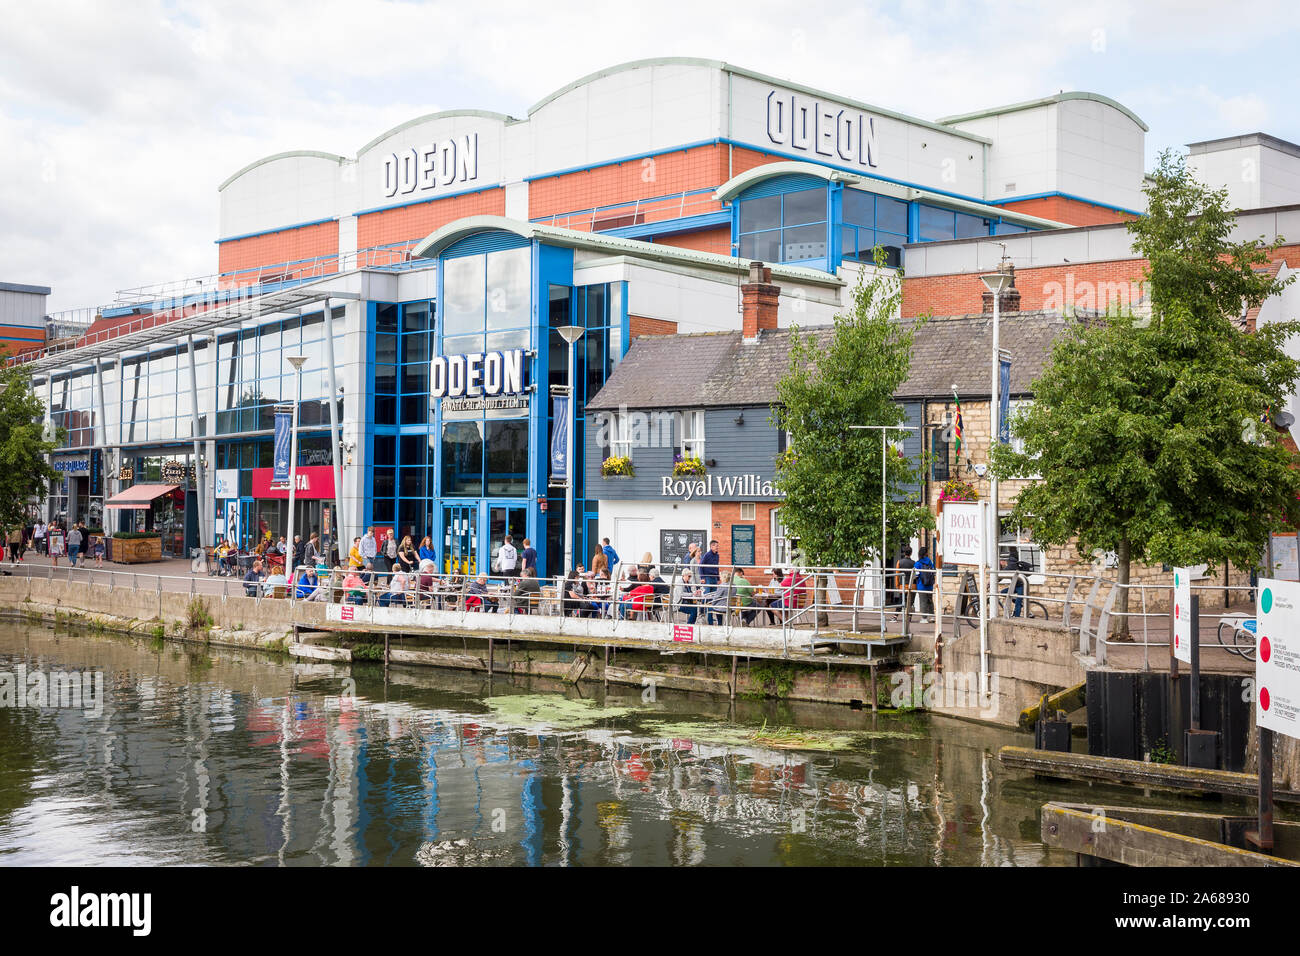 Entertainment complex on Brayford Waterside in Lincoln city England UK including the Odeon and the Royal William IV inn with tourists relaxing over a Stock Photo